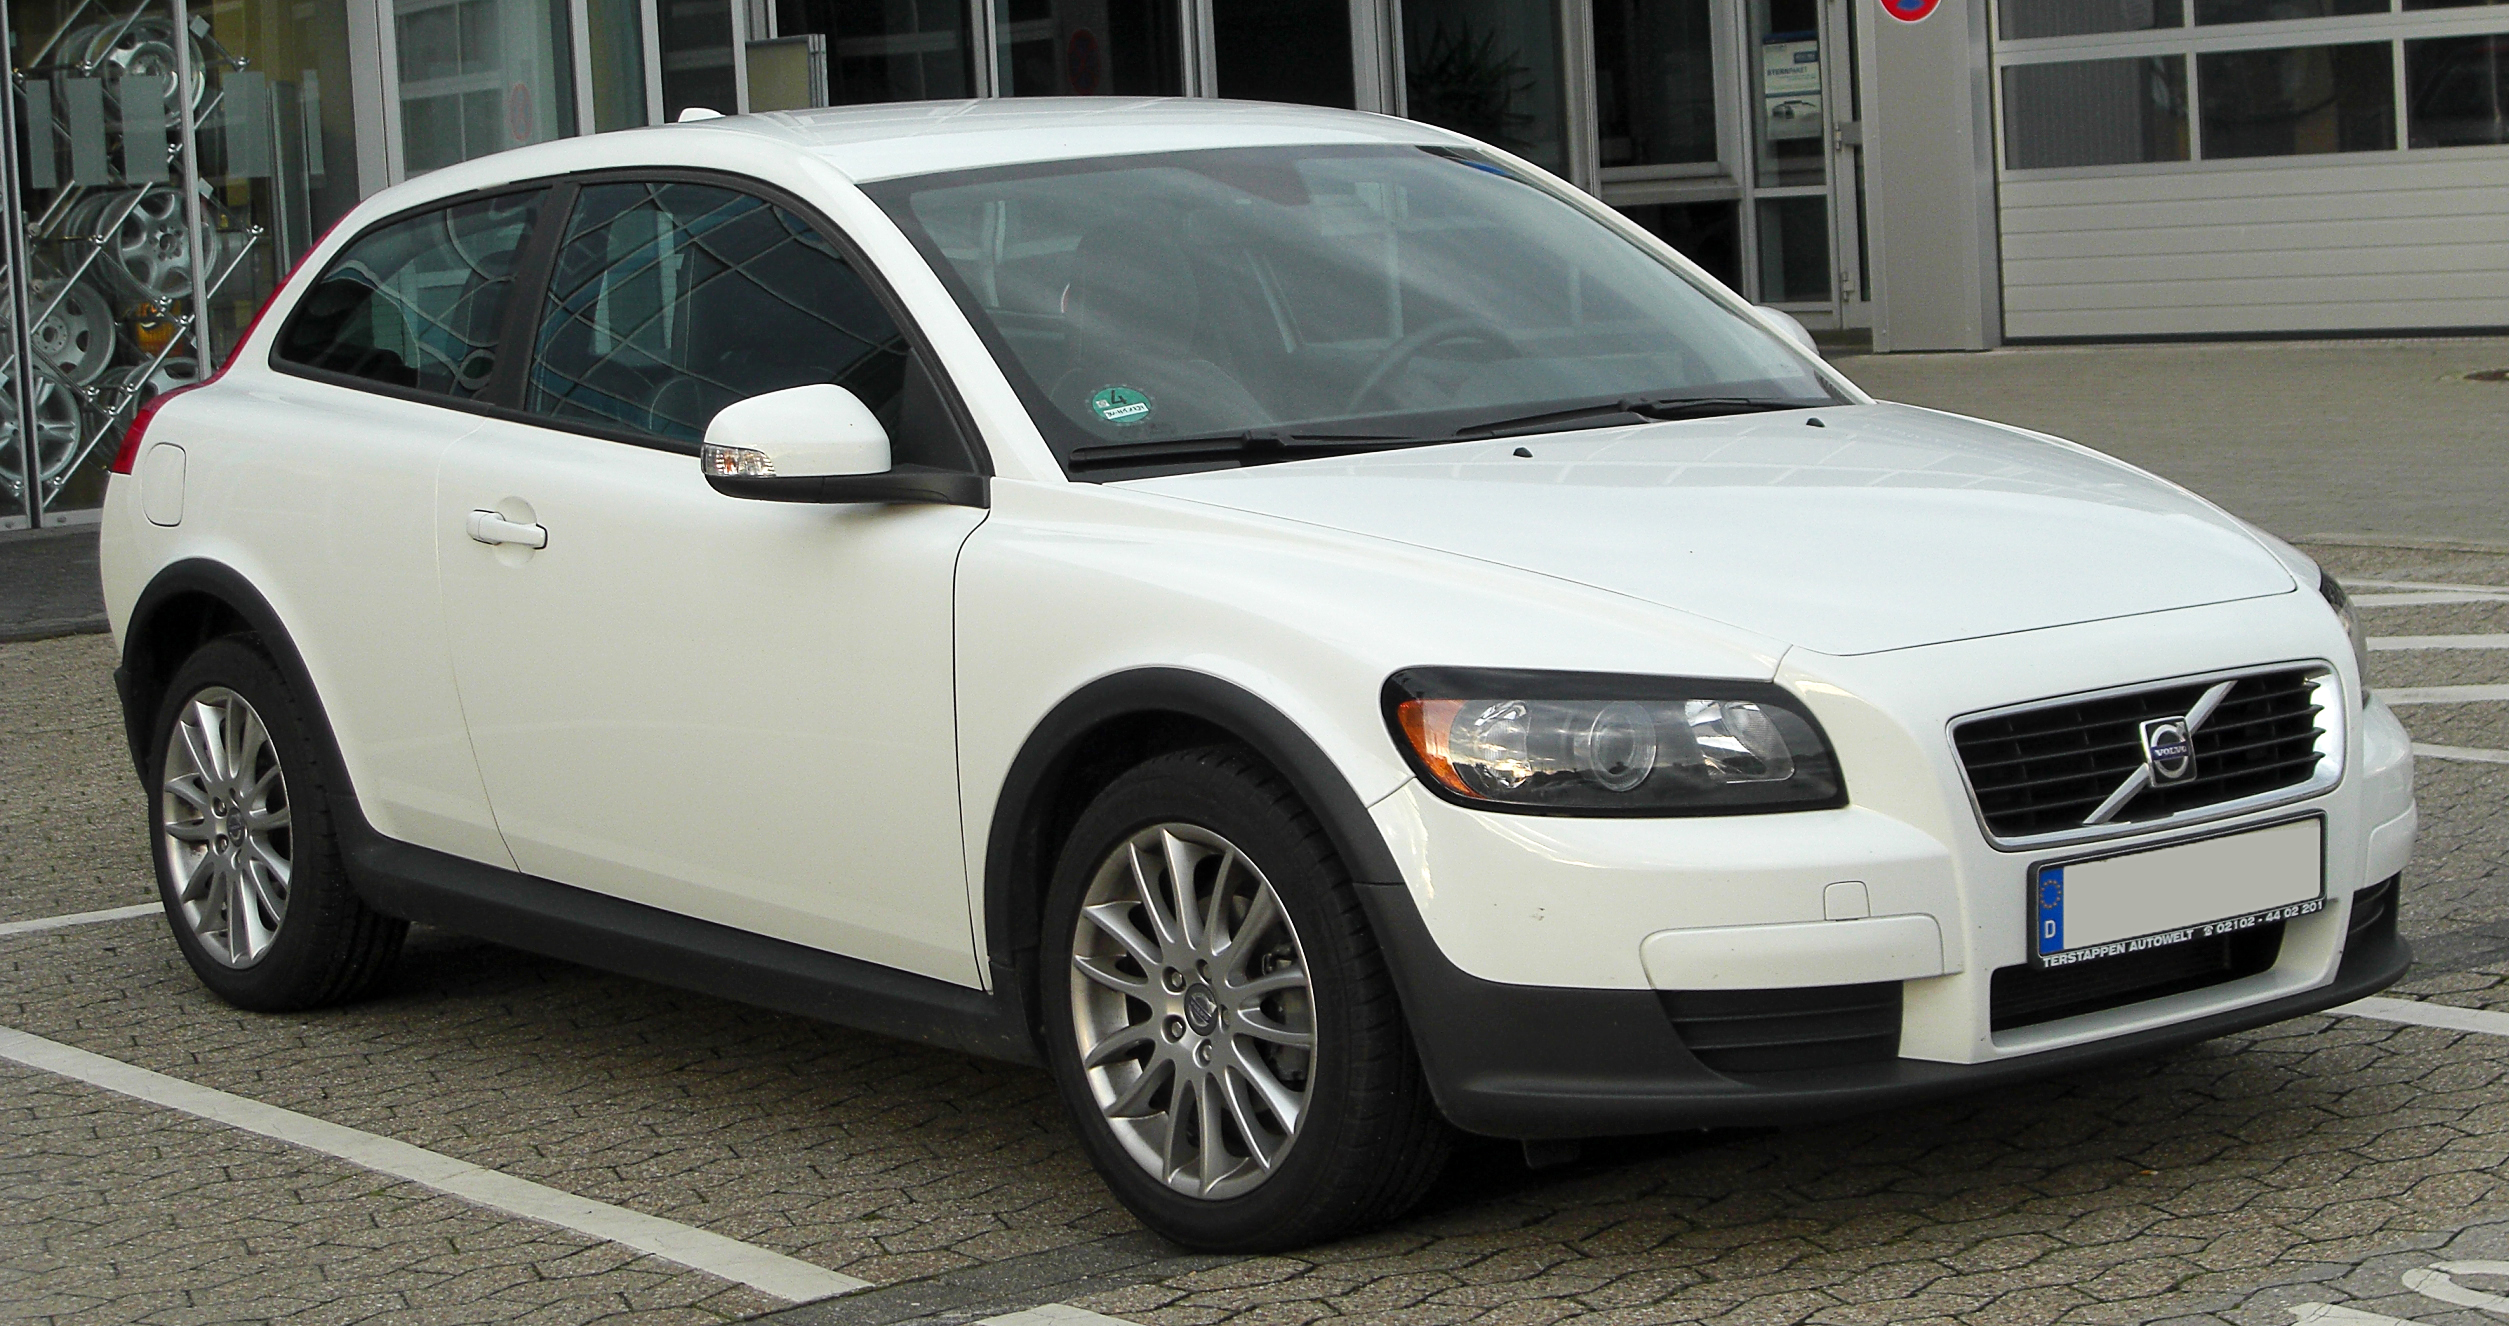 File:Volvo C30 1.6 front 20100918.jpg - Wikimedia Commons